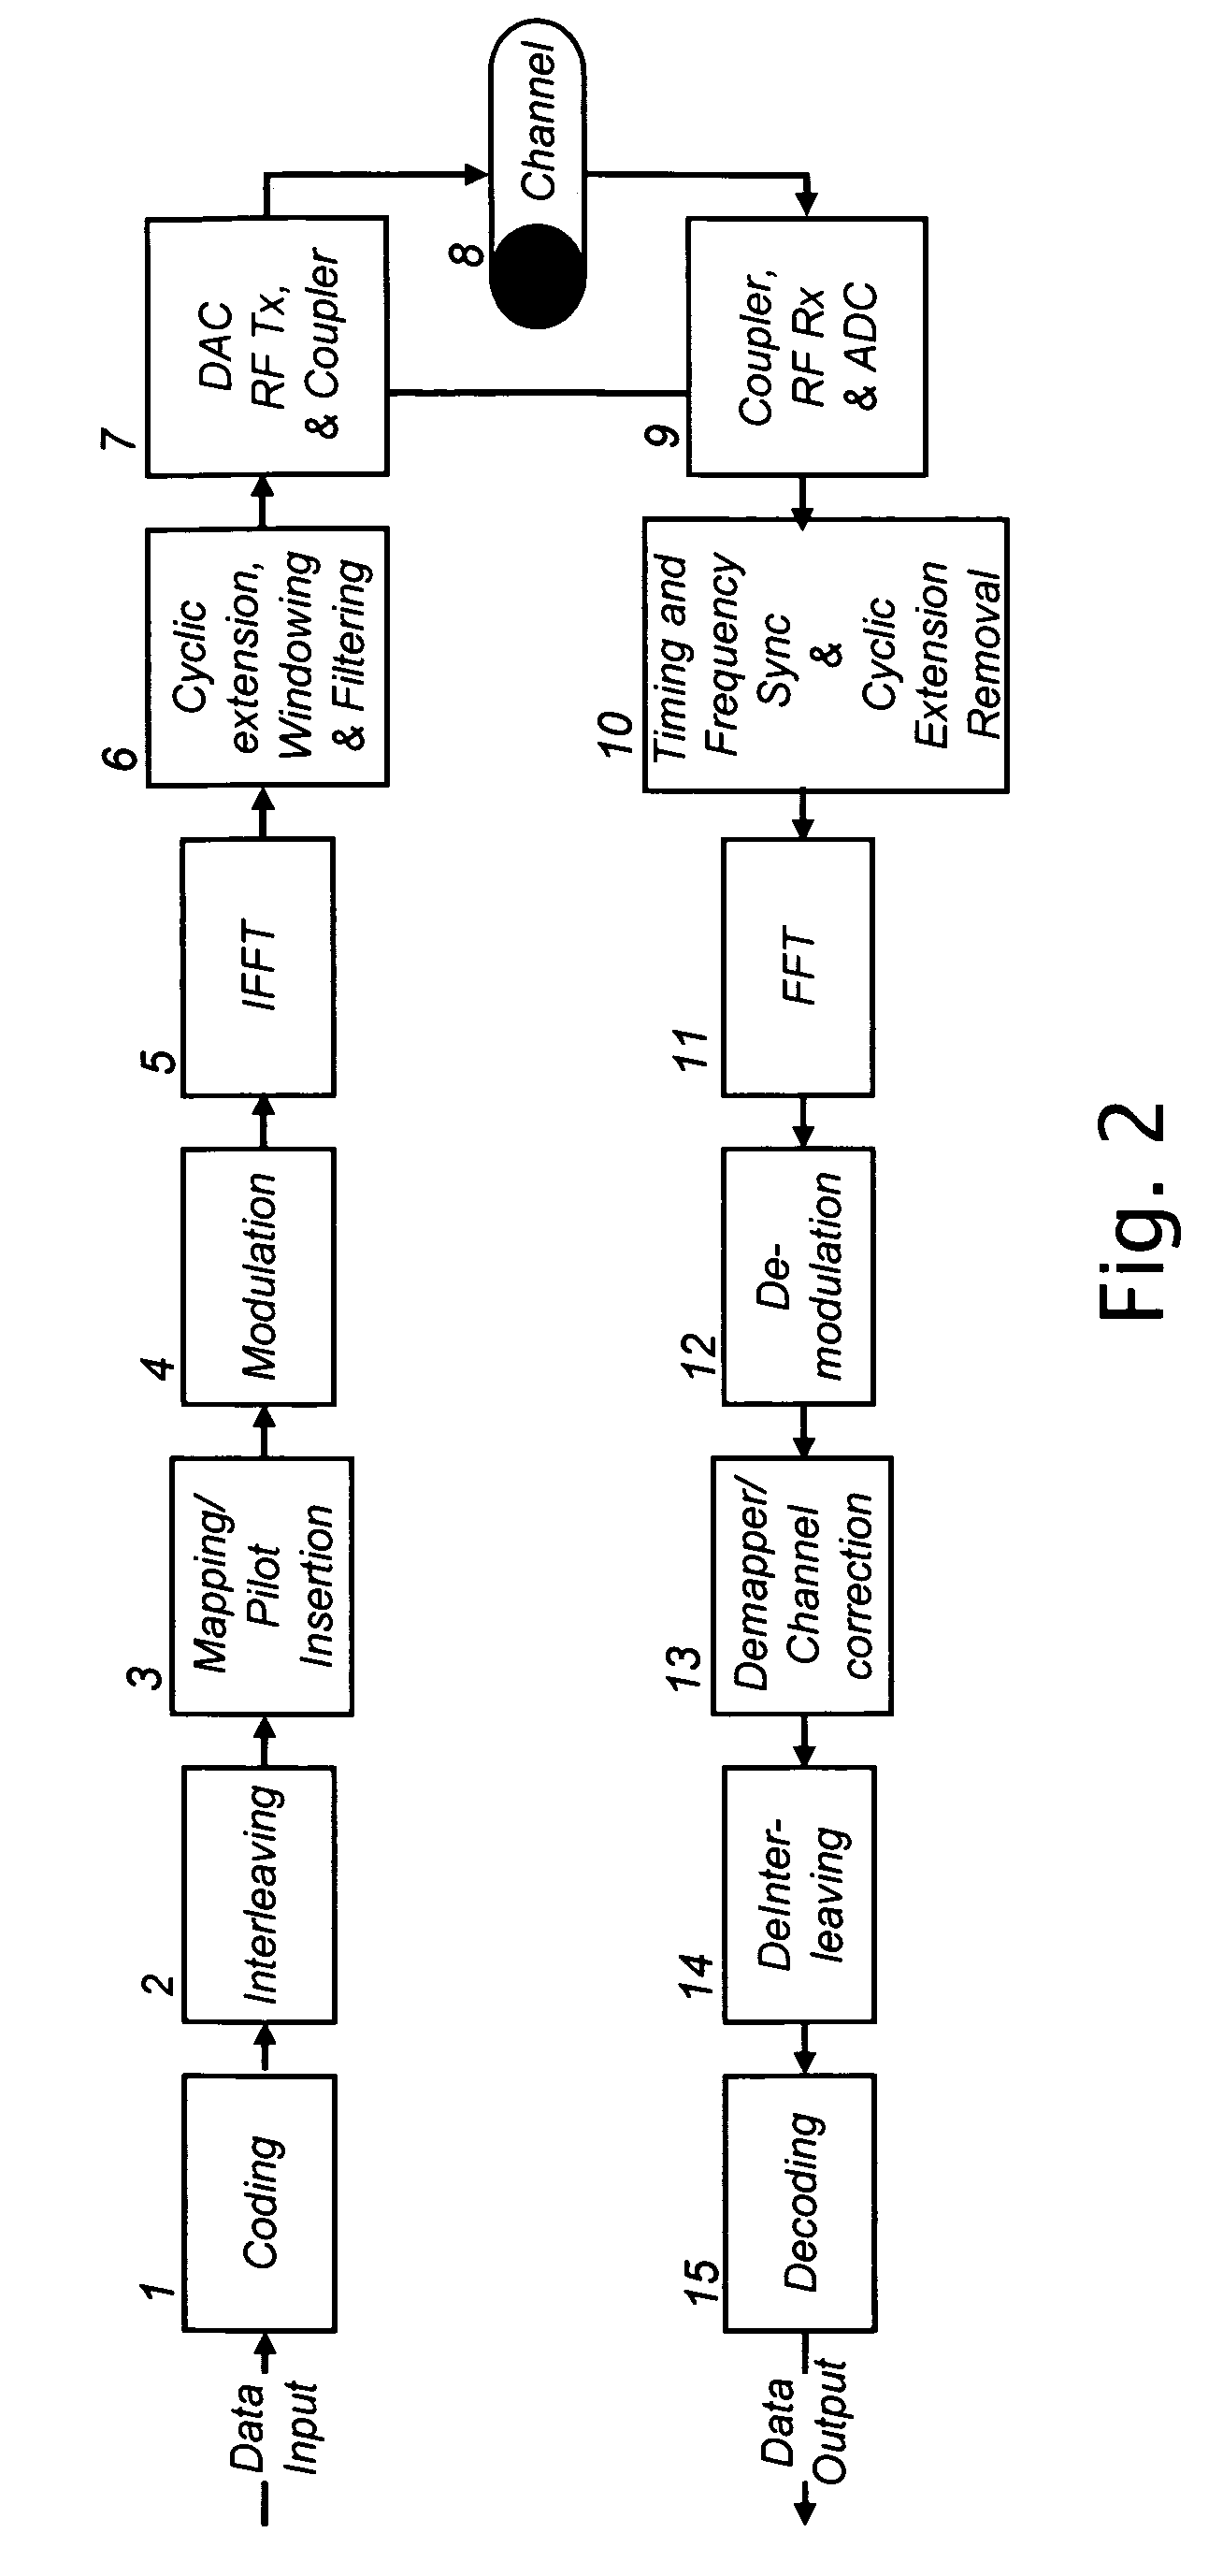 Method and system of channel analysis and carrier selection in OFDM and multi-carrier systems